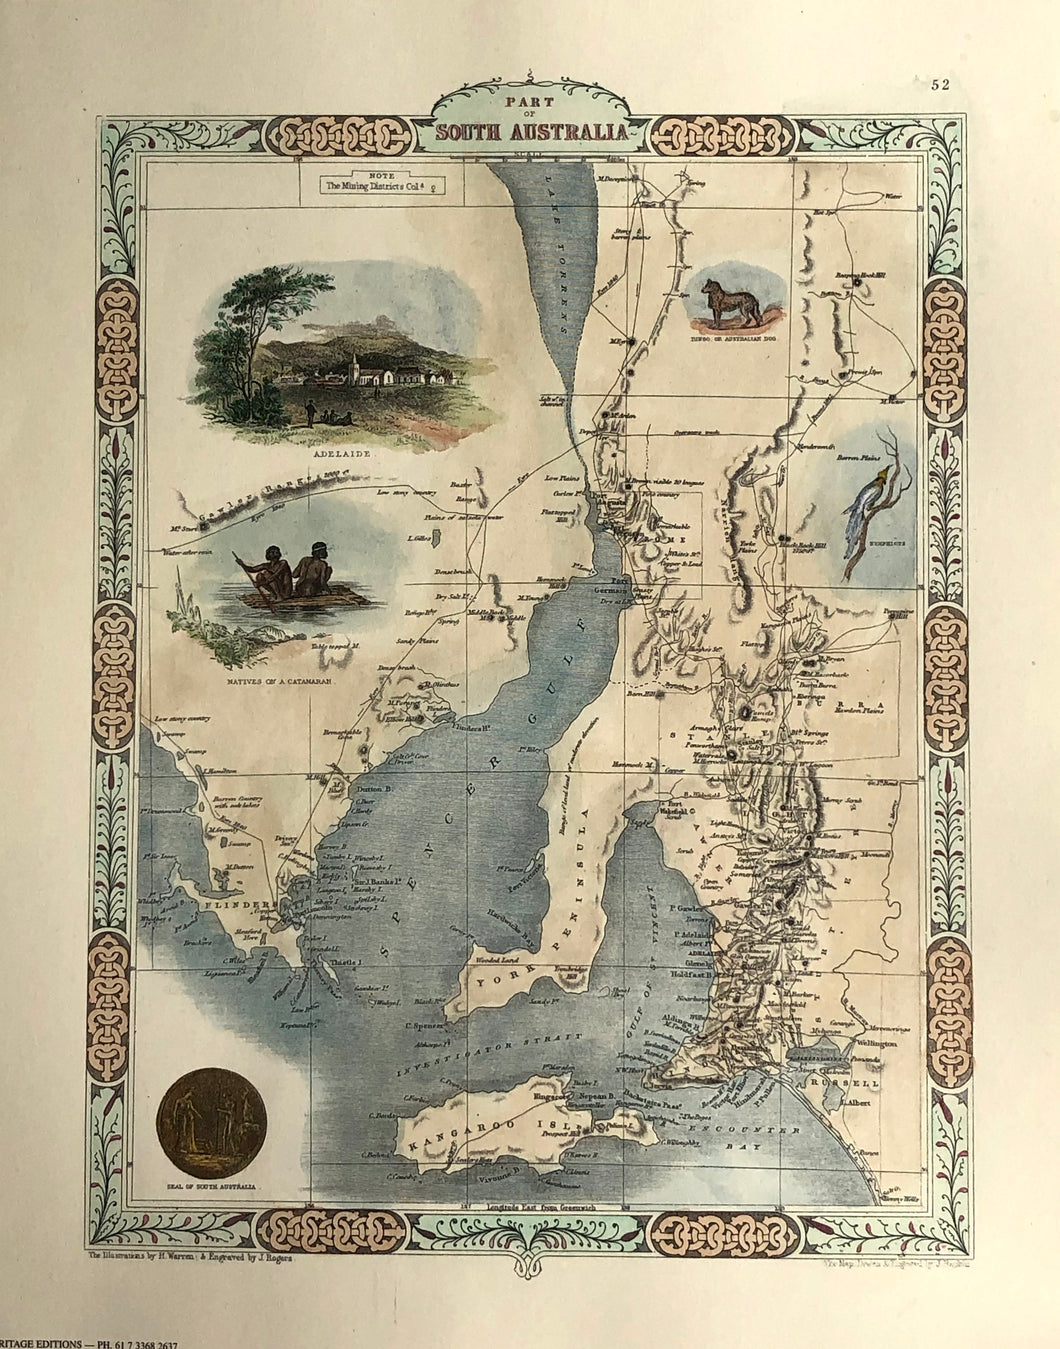 Hand coloured reproduction map of South Australia by John Tallis